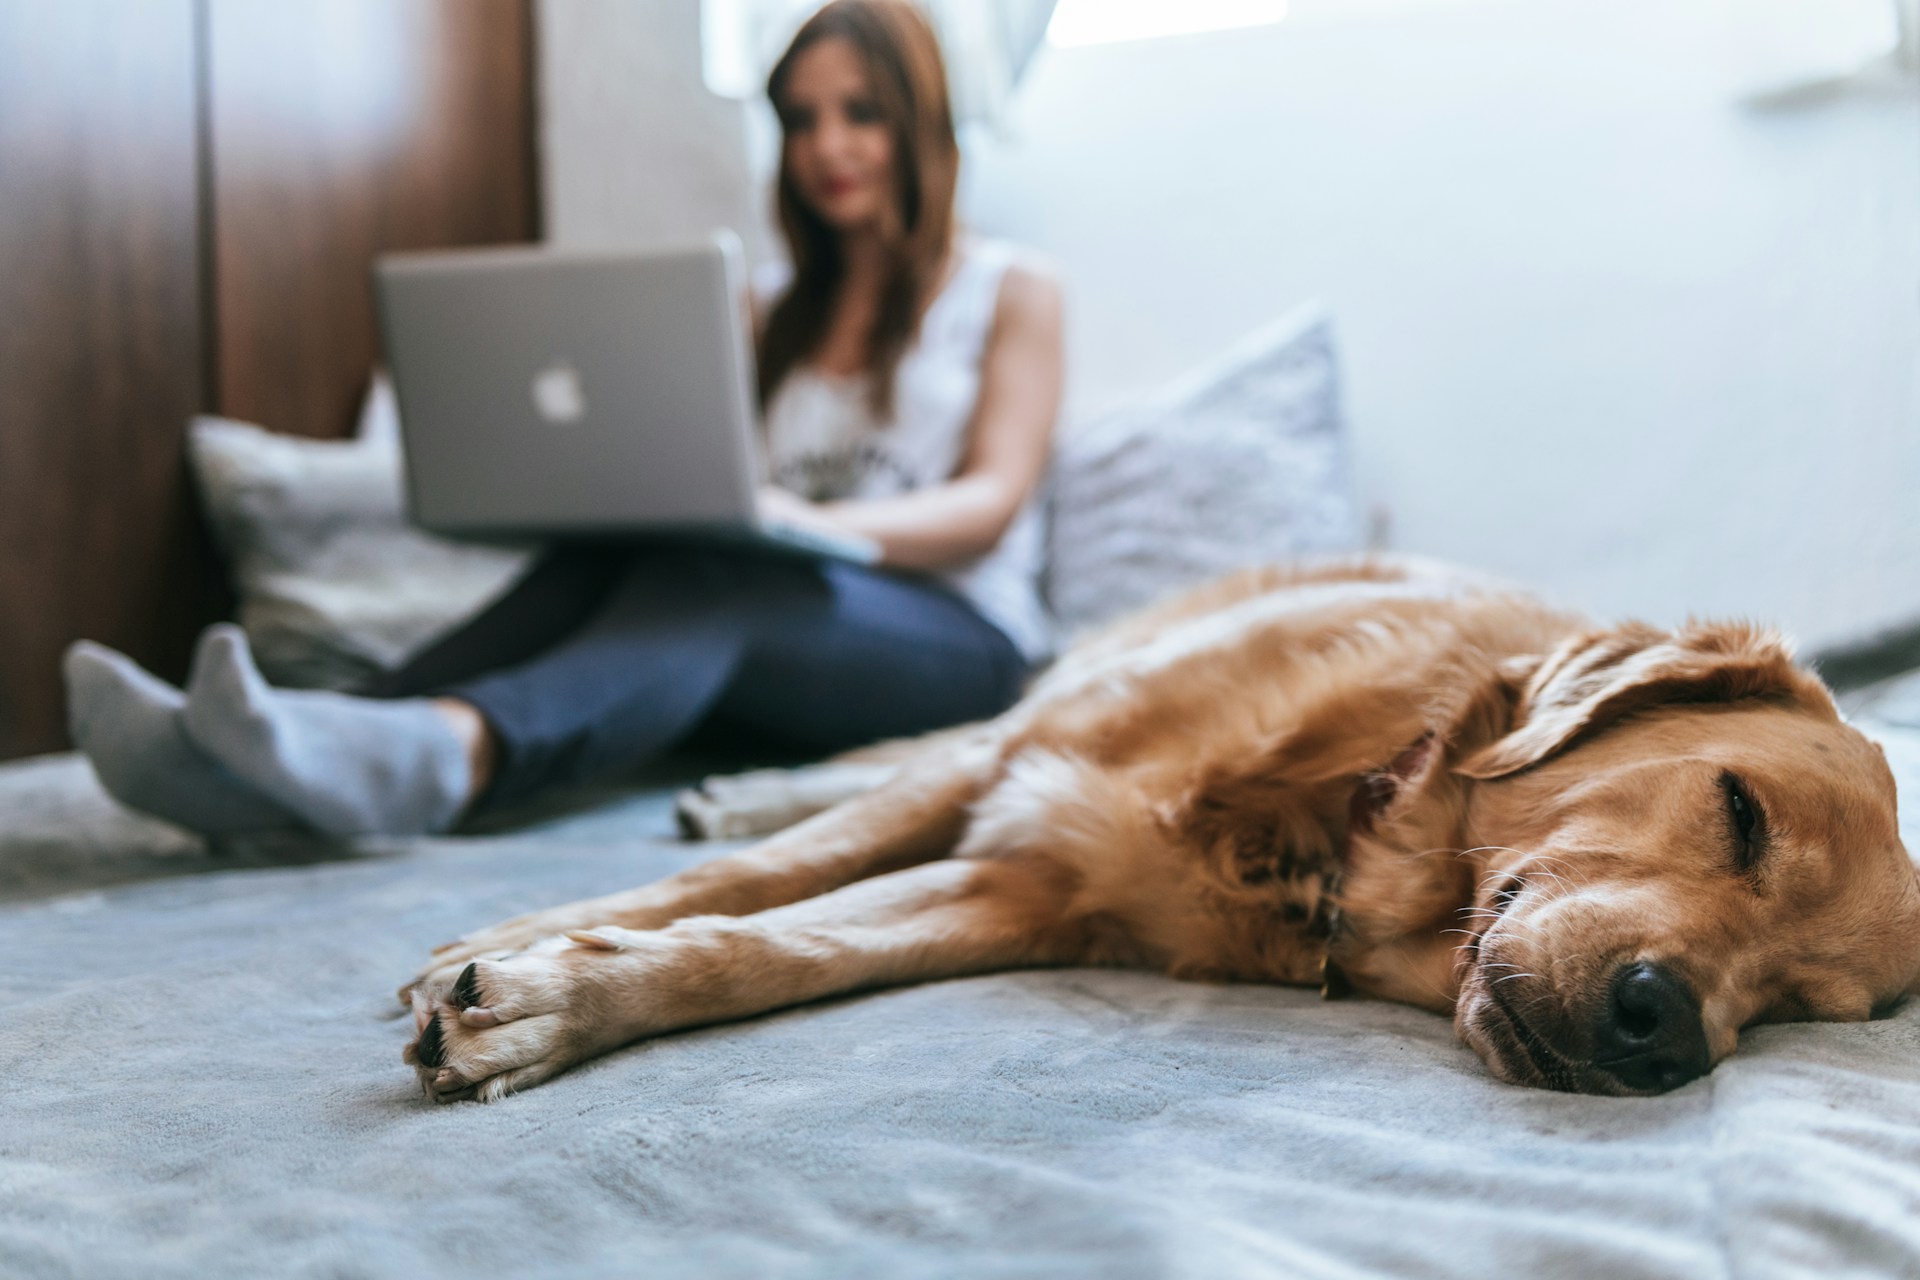 A dog sleeping on a bed next to a woman working on a laptop